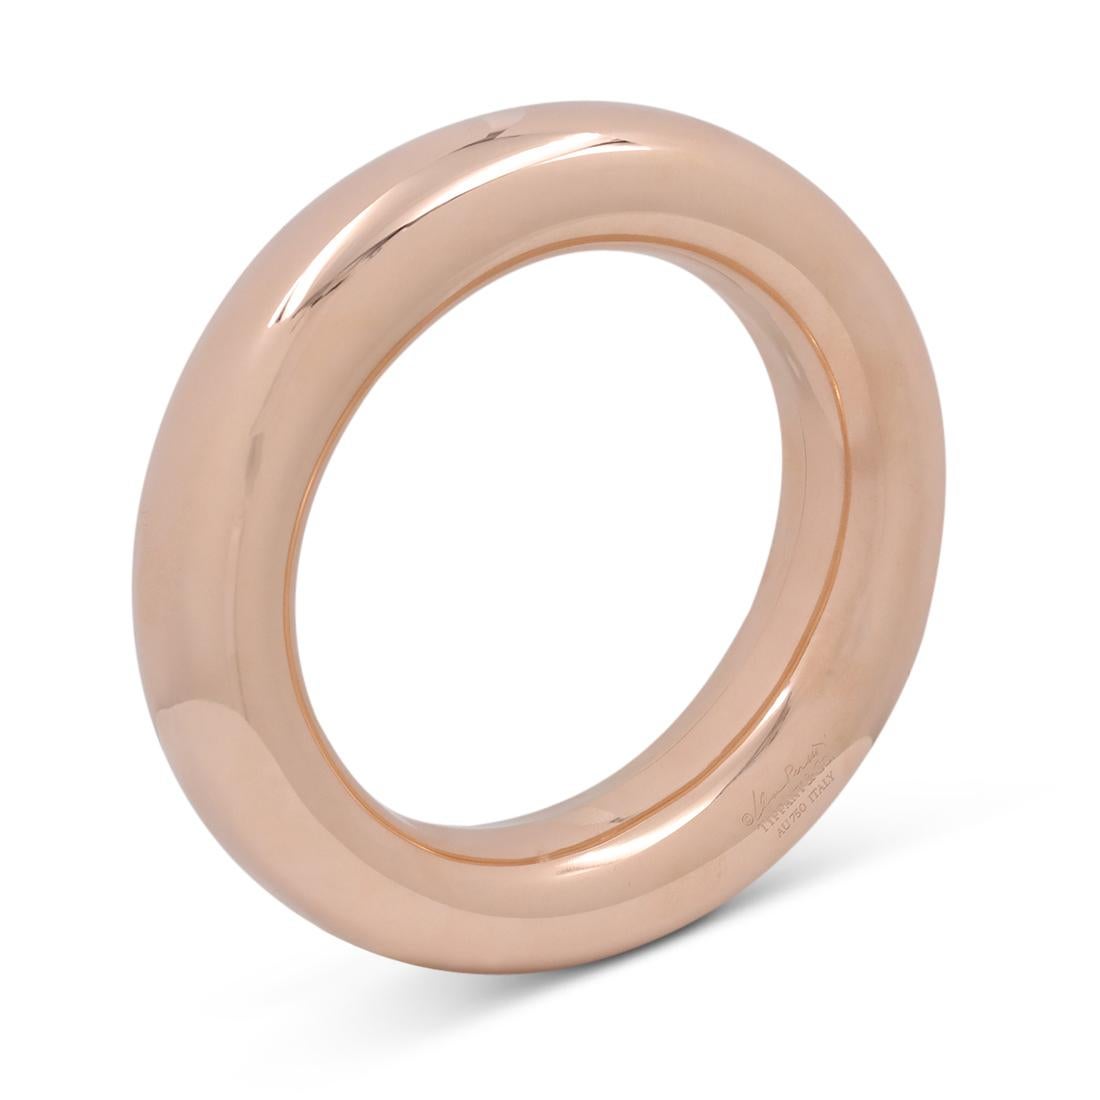 Authentic Elsa Peretti for Tiffany and Co. 'Doughnut' bangle crafted in 18 karat rose gold. Will fit up to a 6 1/4 inch wrist. The bangle is 21 mm wide. Signed Elsa Peretti, Tiffany & Co., AU 750, ITALY on the base of the bangle. The bangle is not